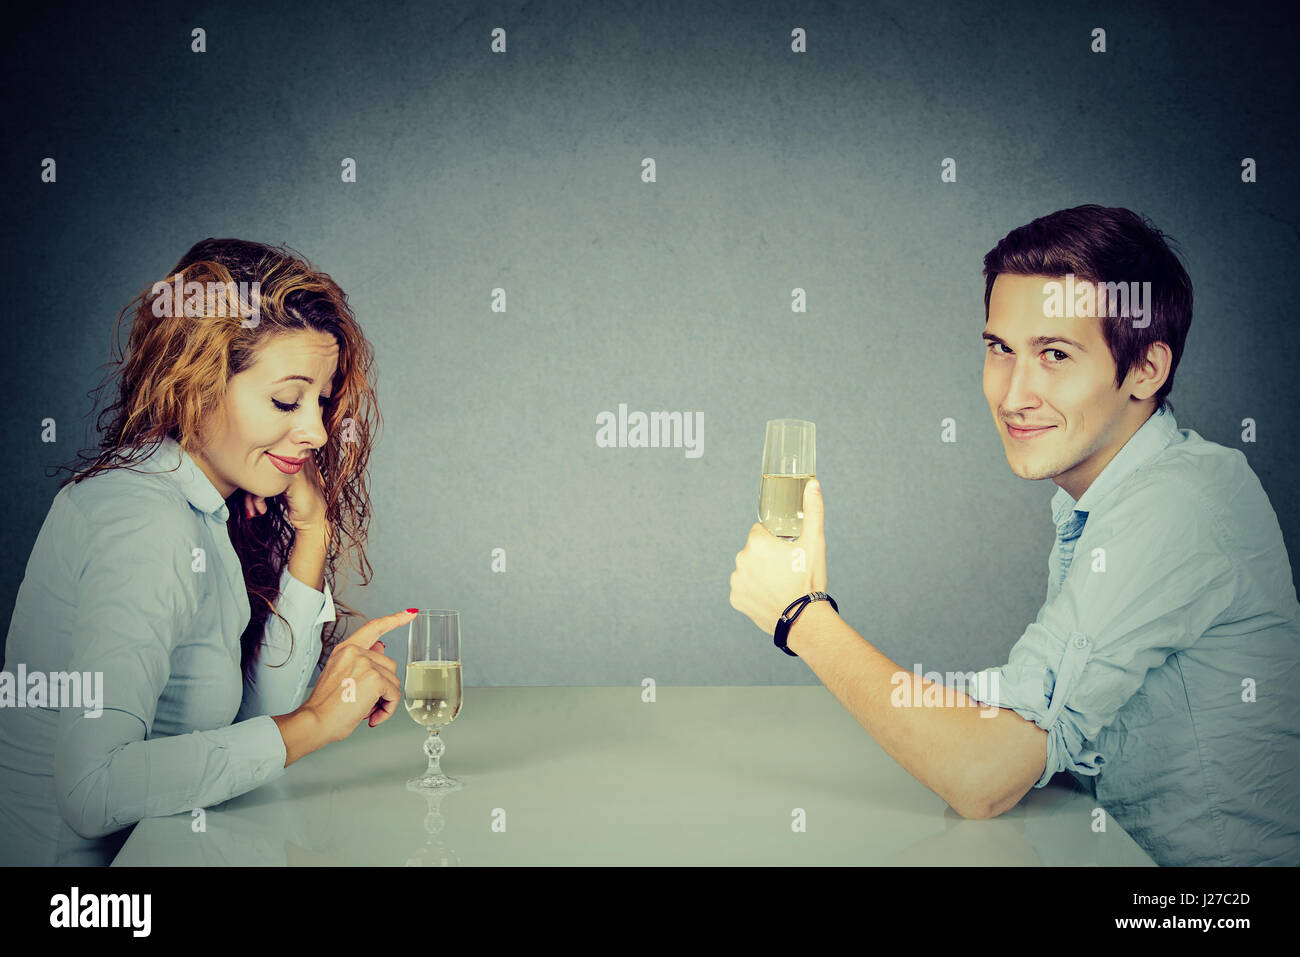 Sly man and skeptical woman sitting at table drinking wine Stock Photo